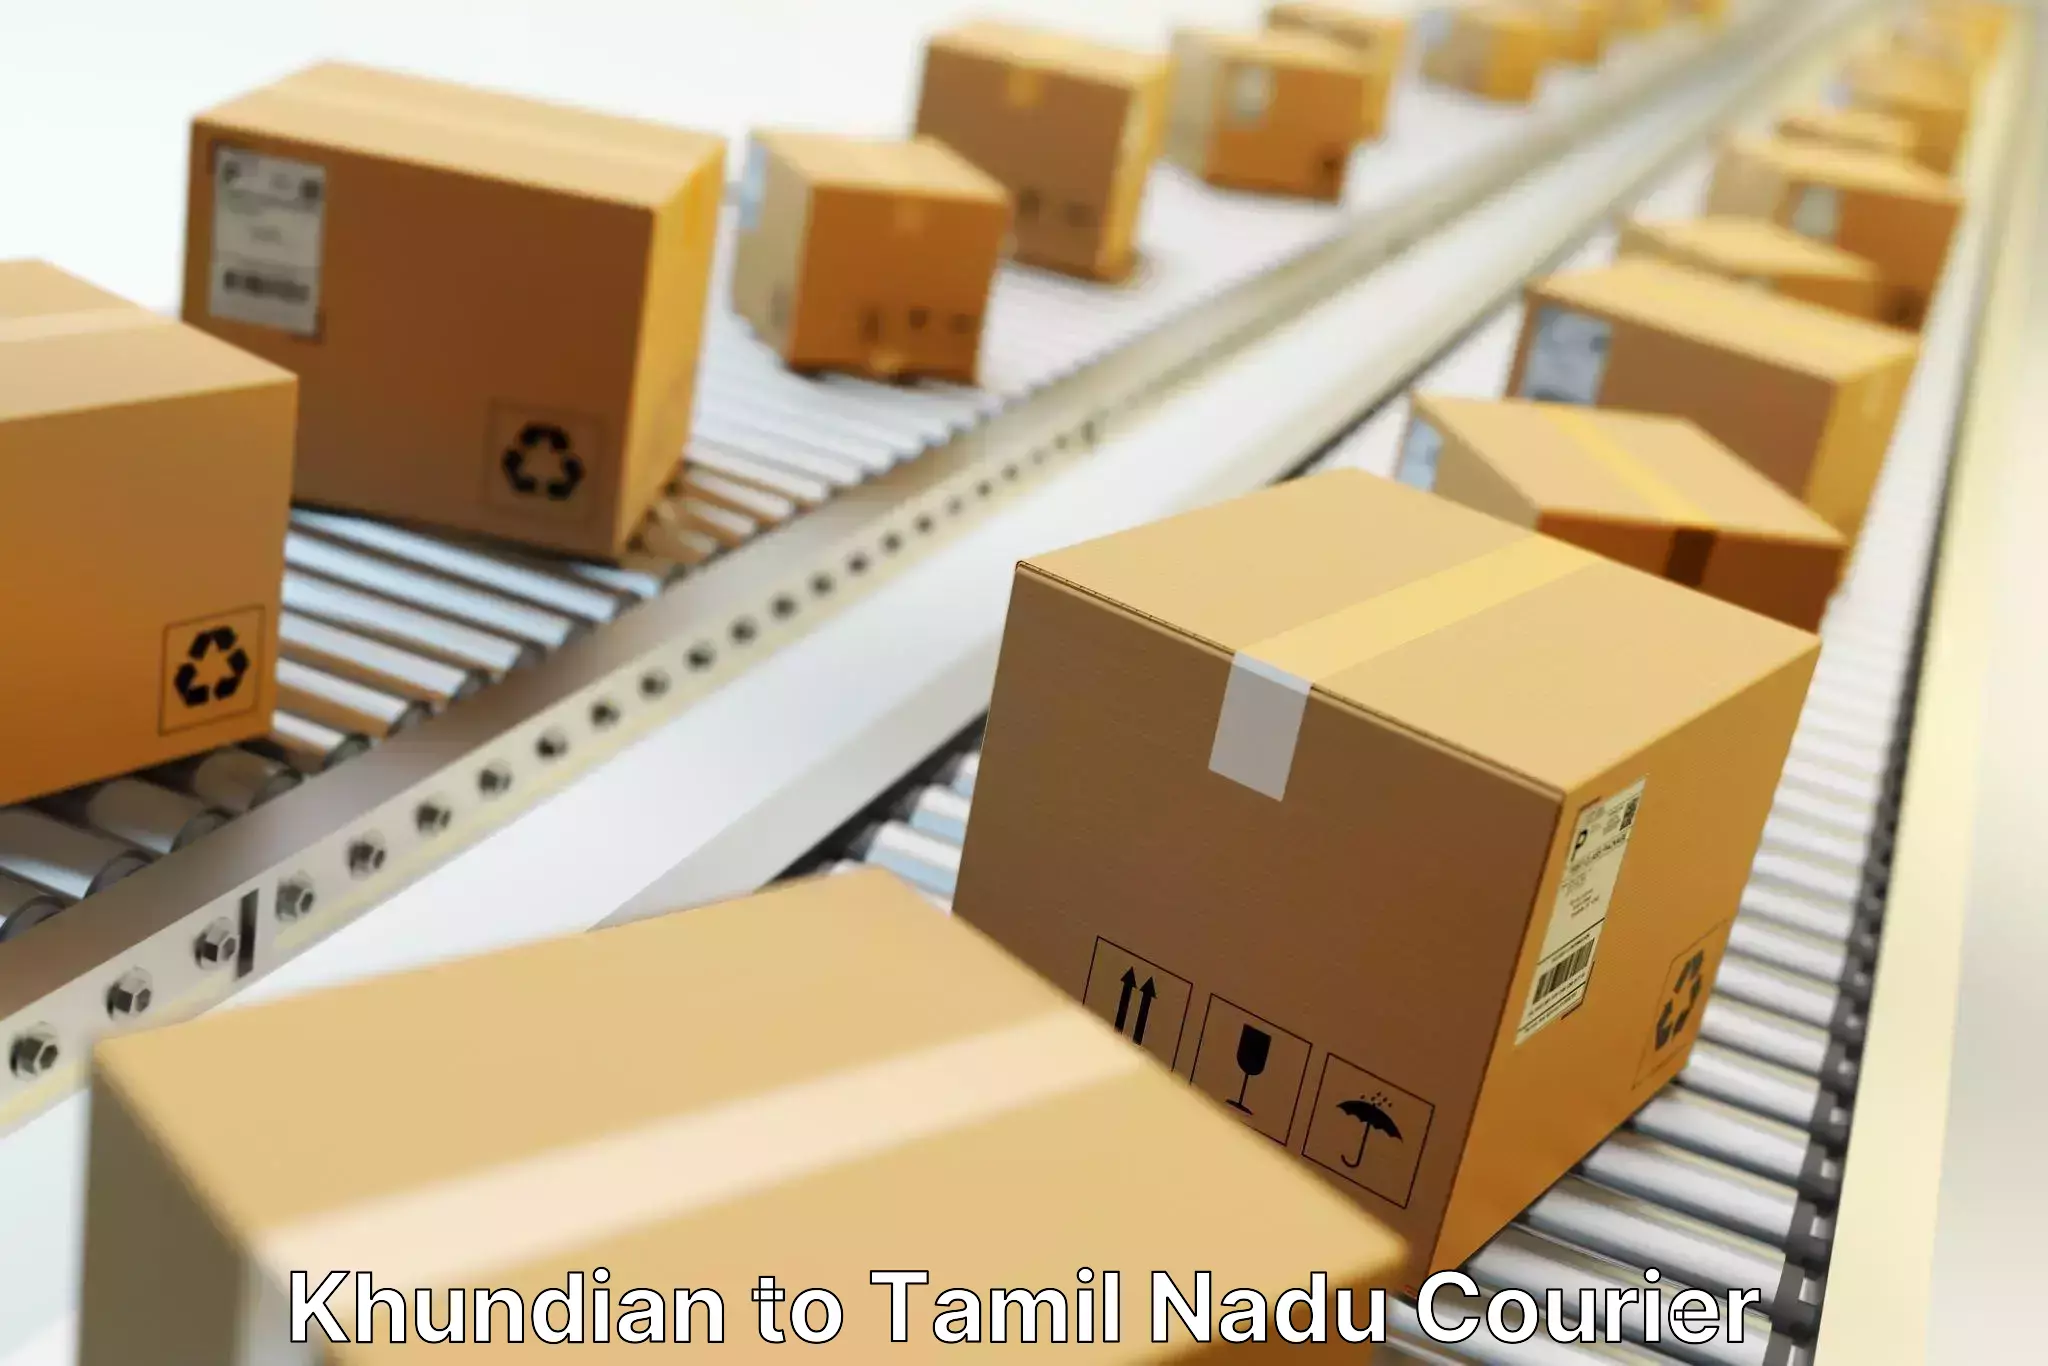 High-priority parcel service Khundian to Chennai Port